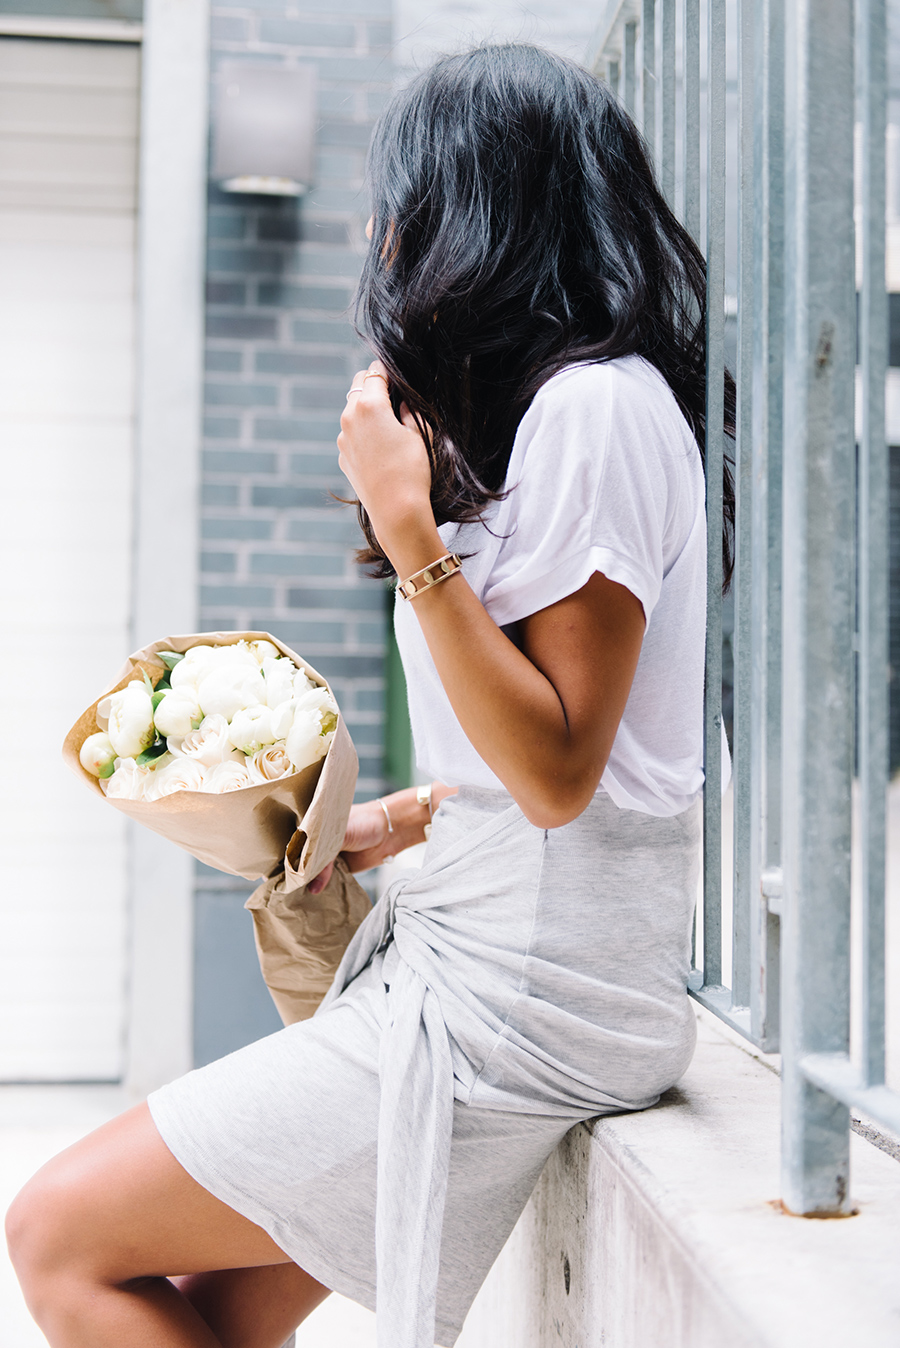 the fifth discovery skirt white isabel marant sneakers roses peonies bouquet flowers white pretty model outfit style inspiration streetdstyle not your standard blog kayla seah